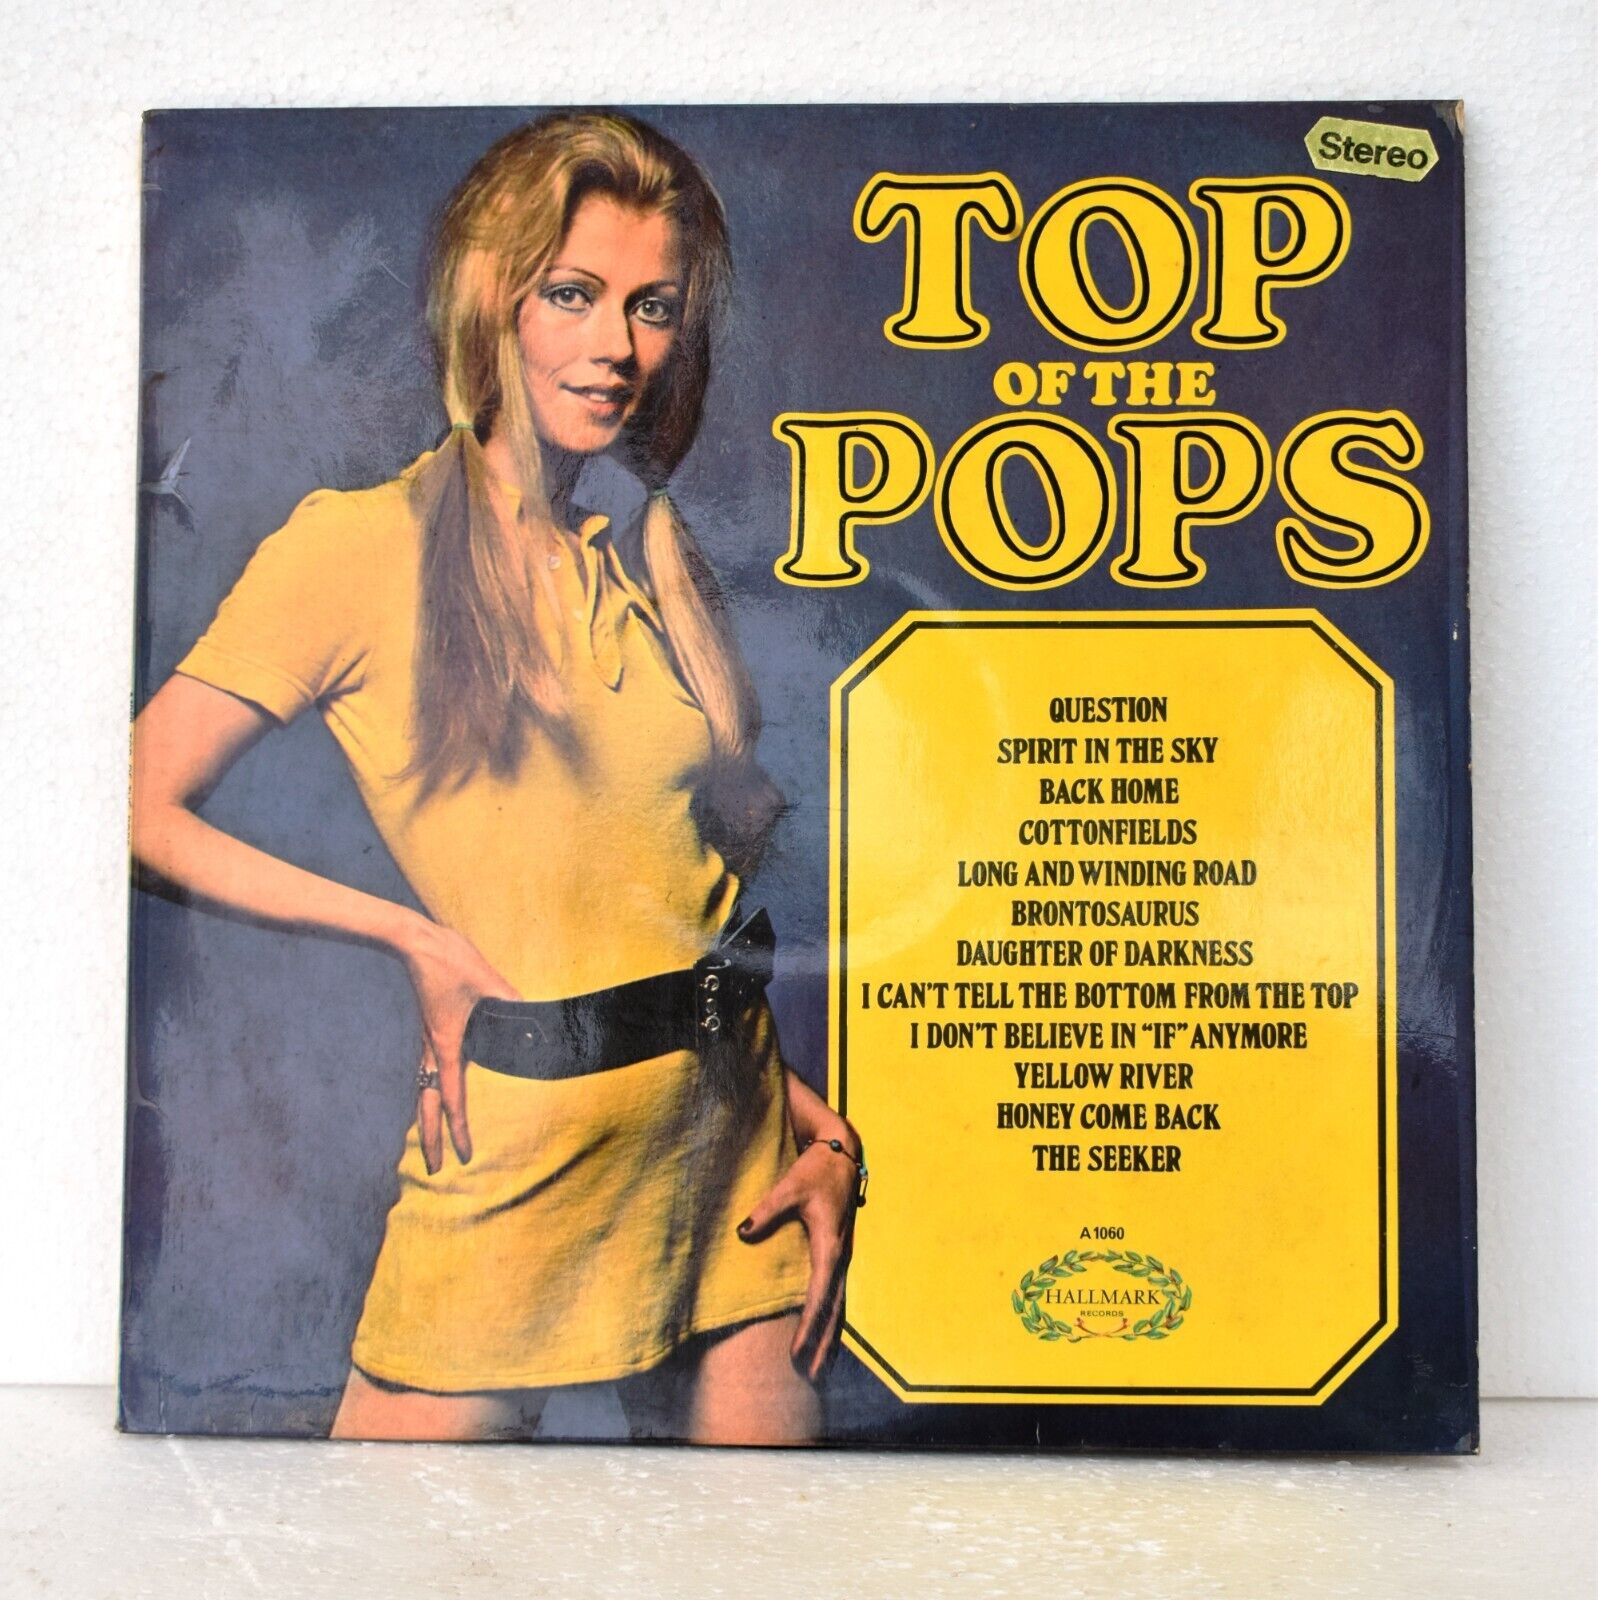 Vintage Hallmark Records Stereo Top Of The Pops Vinyl Record London 1970 Collect